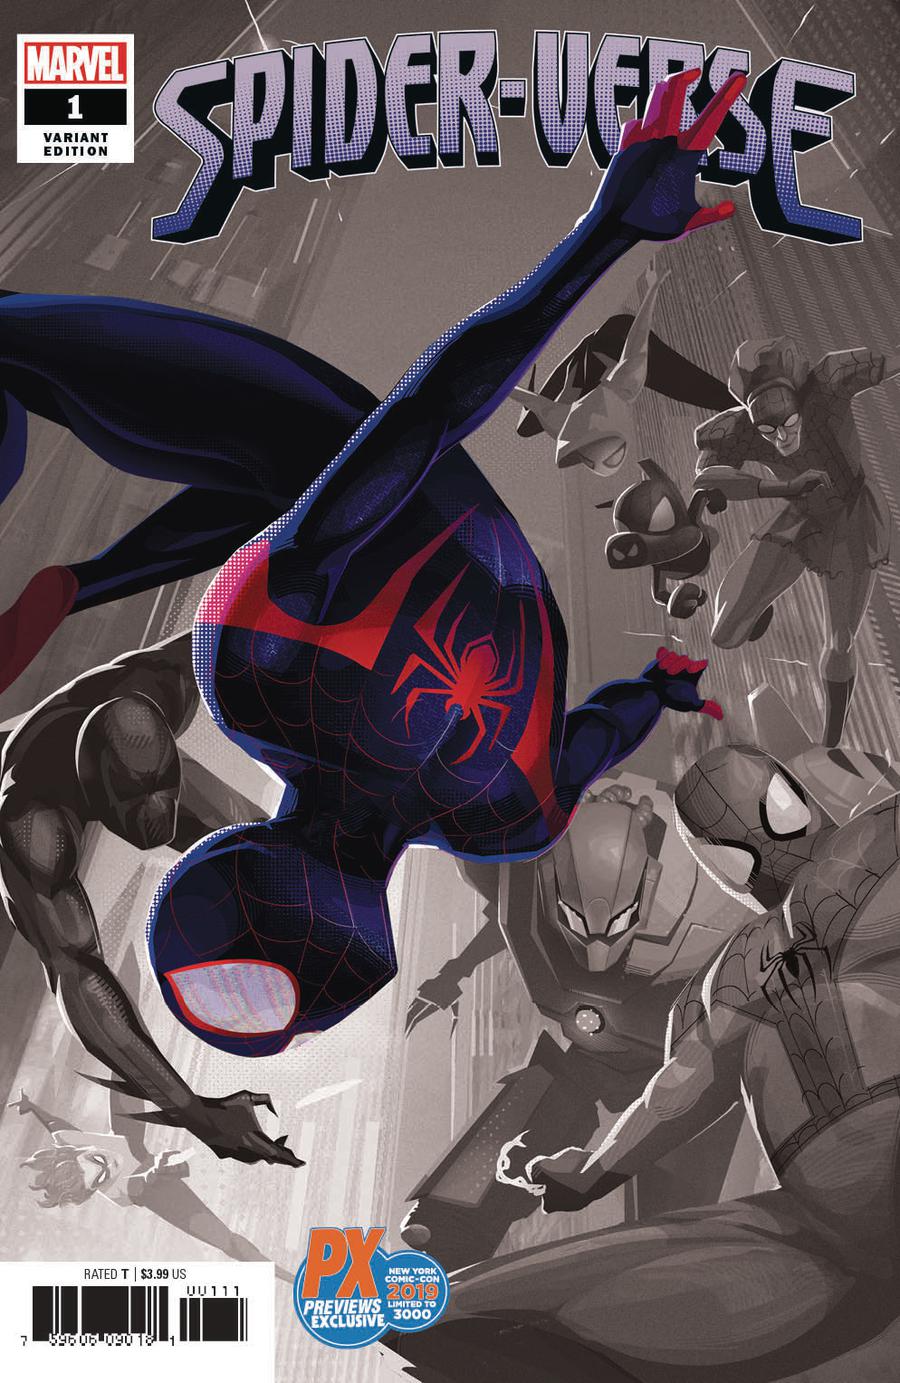 Spider-Verse Vol 3 #1 Cover E NYCC 2019 Exclusive Wendell Dalit Variant Cover